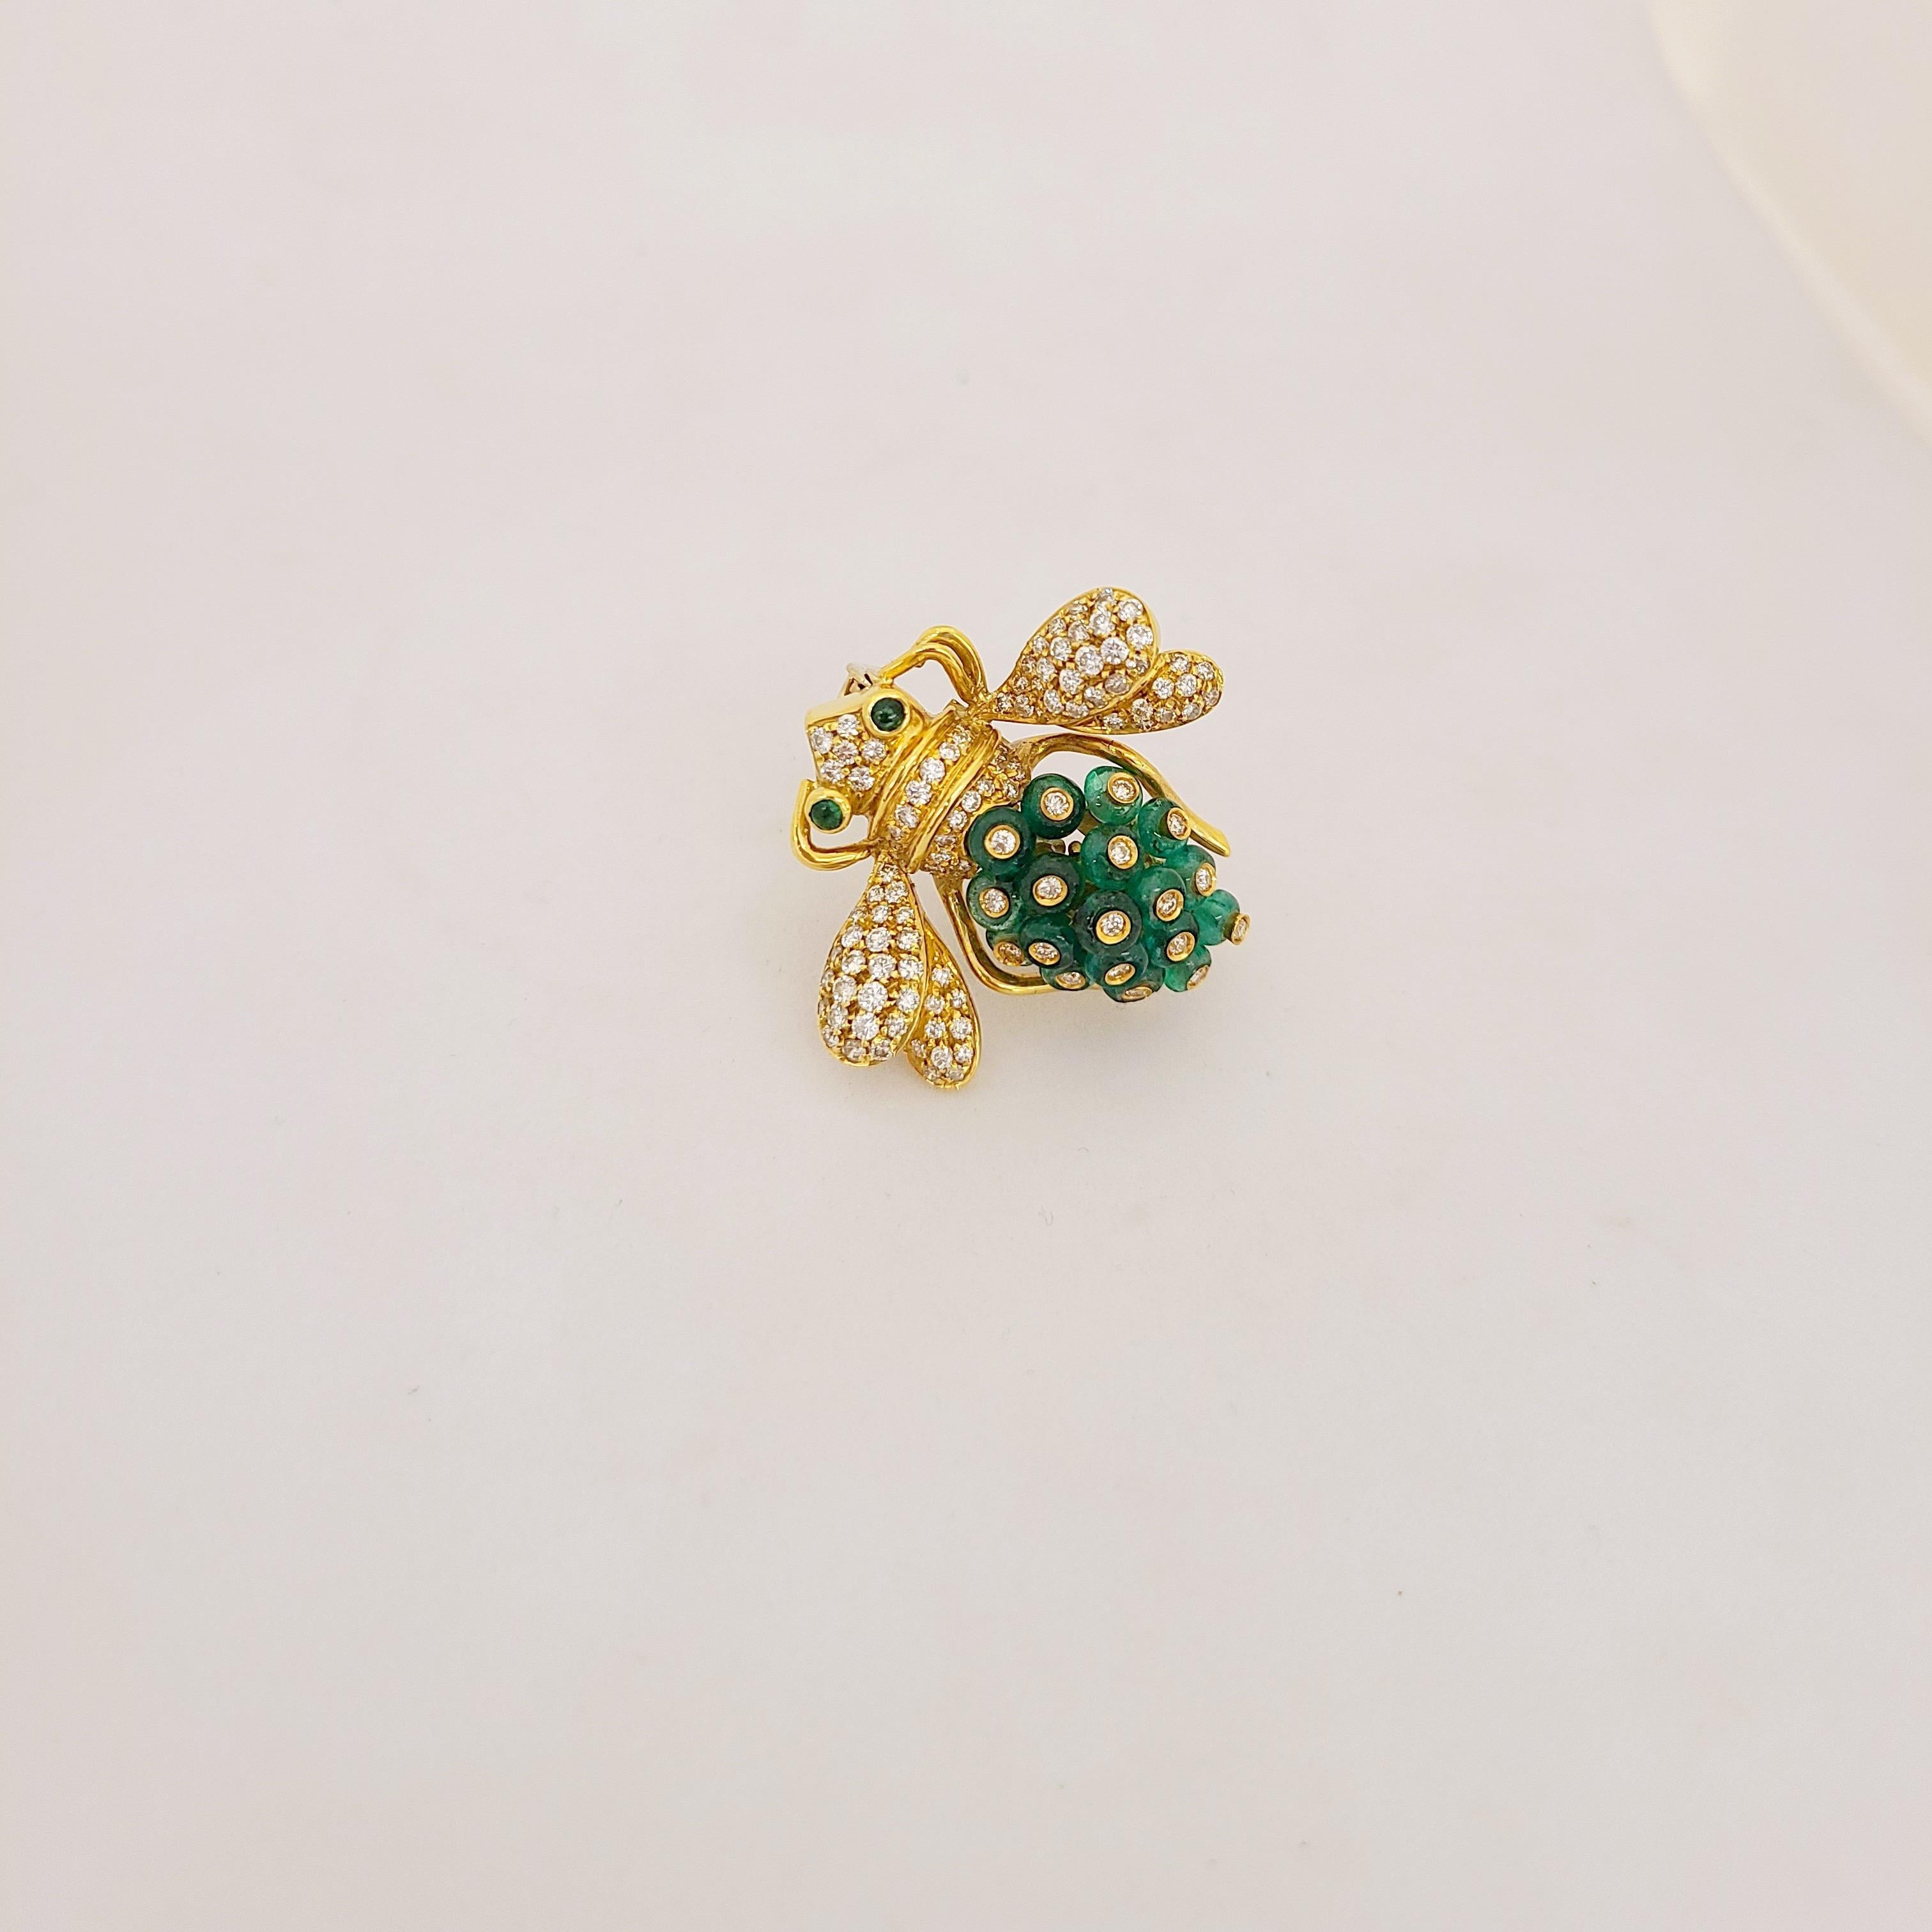 Retro Giovane Italy 18KT Gold, 4.27 Carat Emeralds and 1.53 Carat Diamond Bee Brooch For Sale